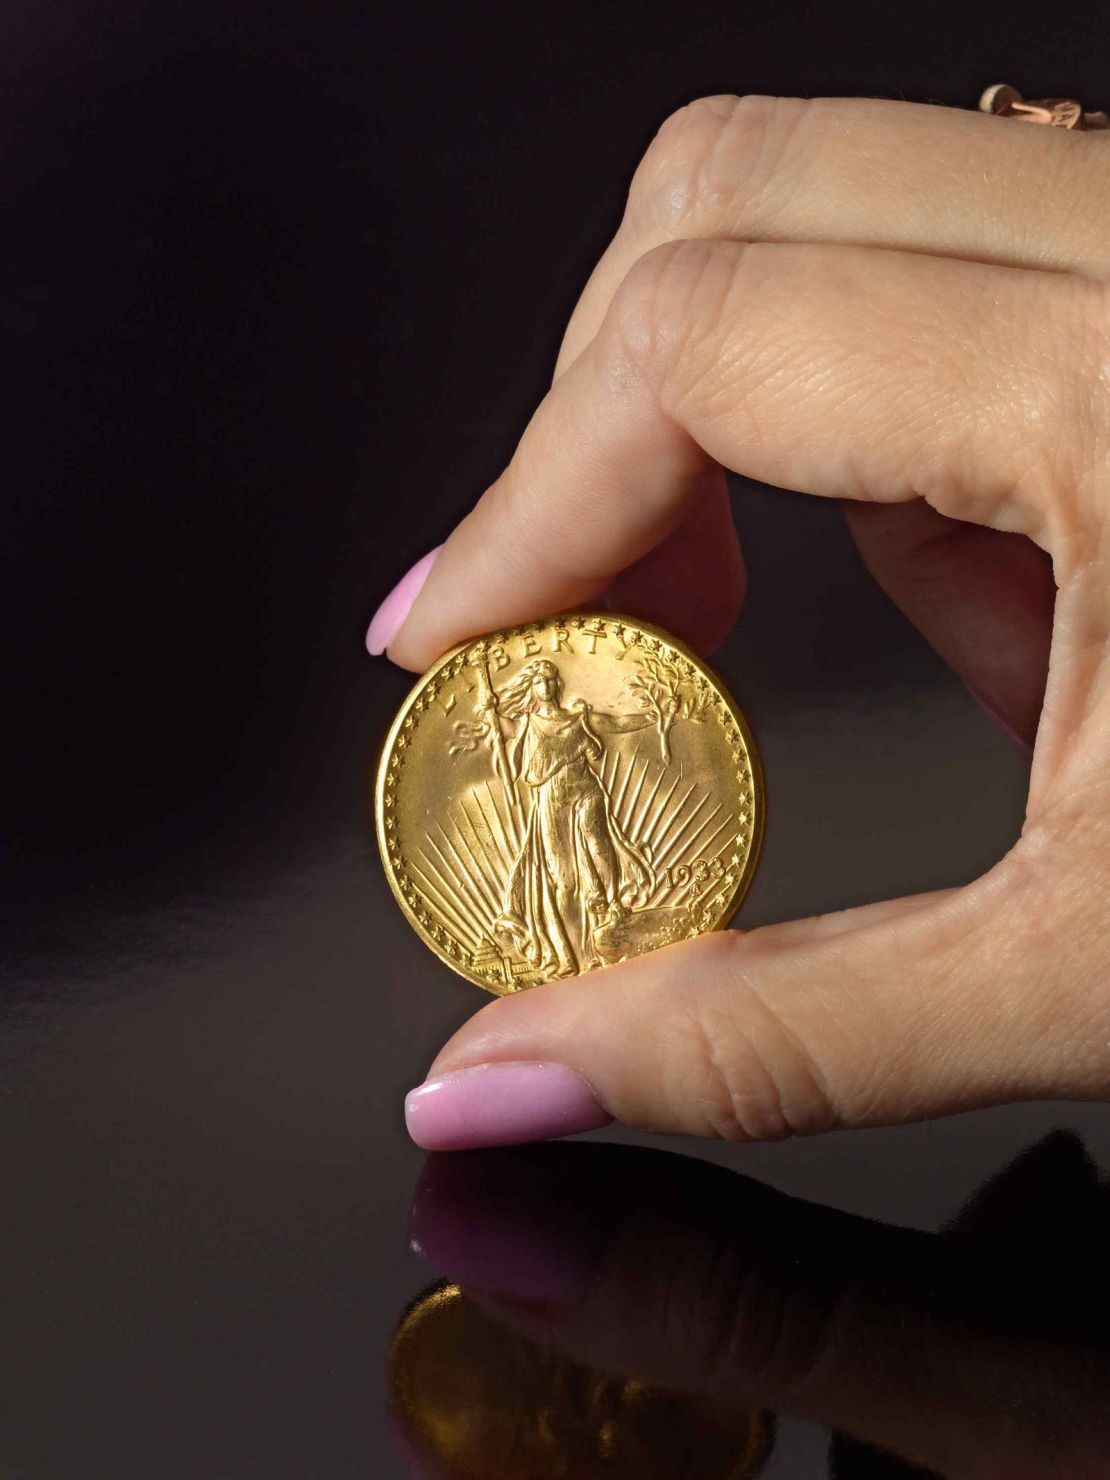 Sotheby's auction hosue has dubbed the 1933 Double Eagle "the most famous coin on the planet."